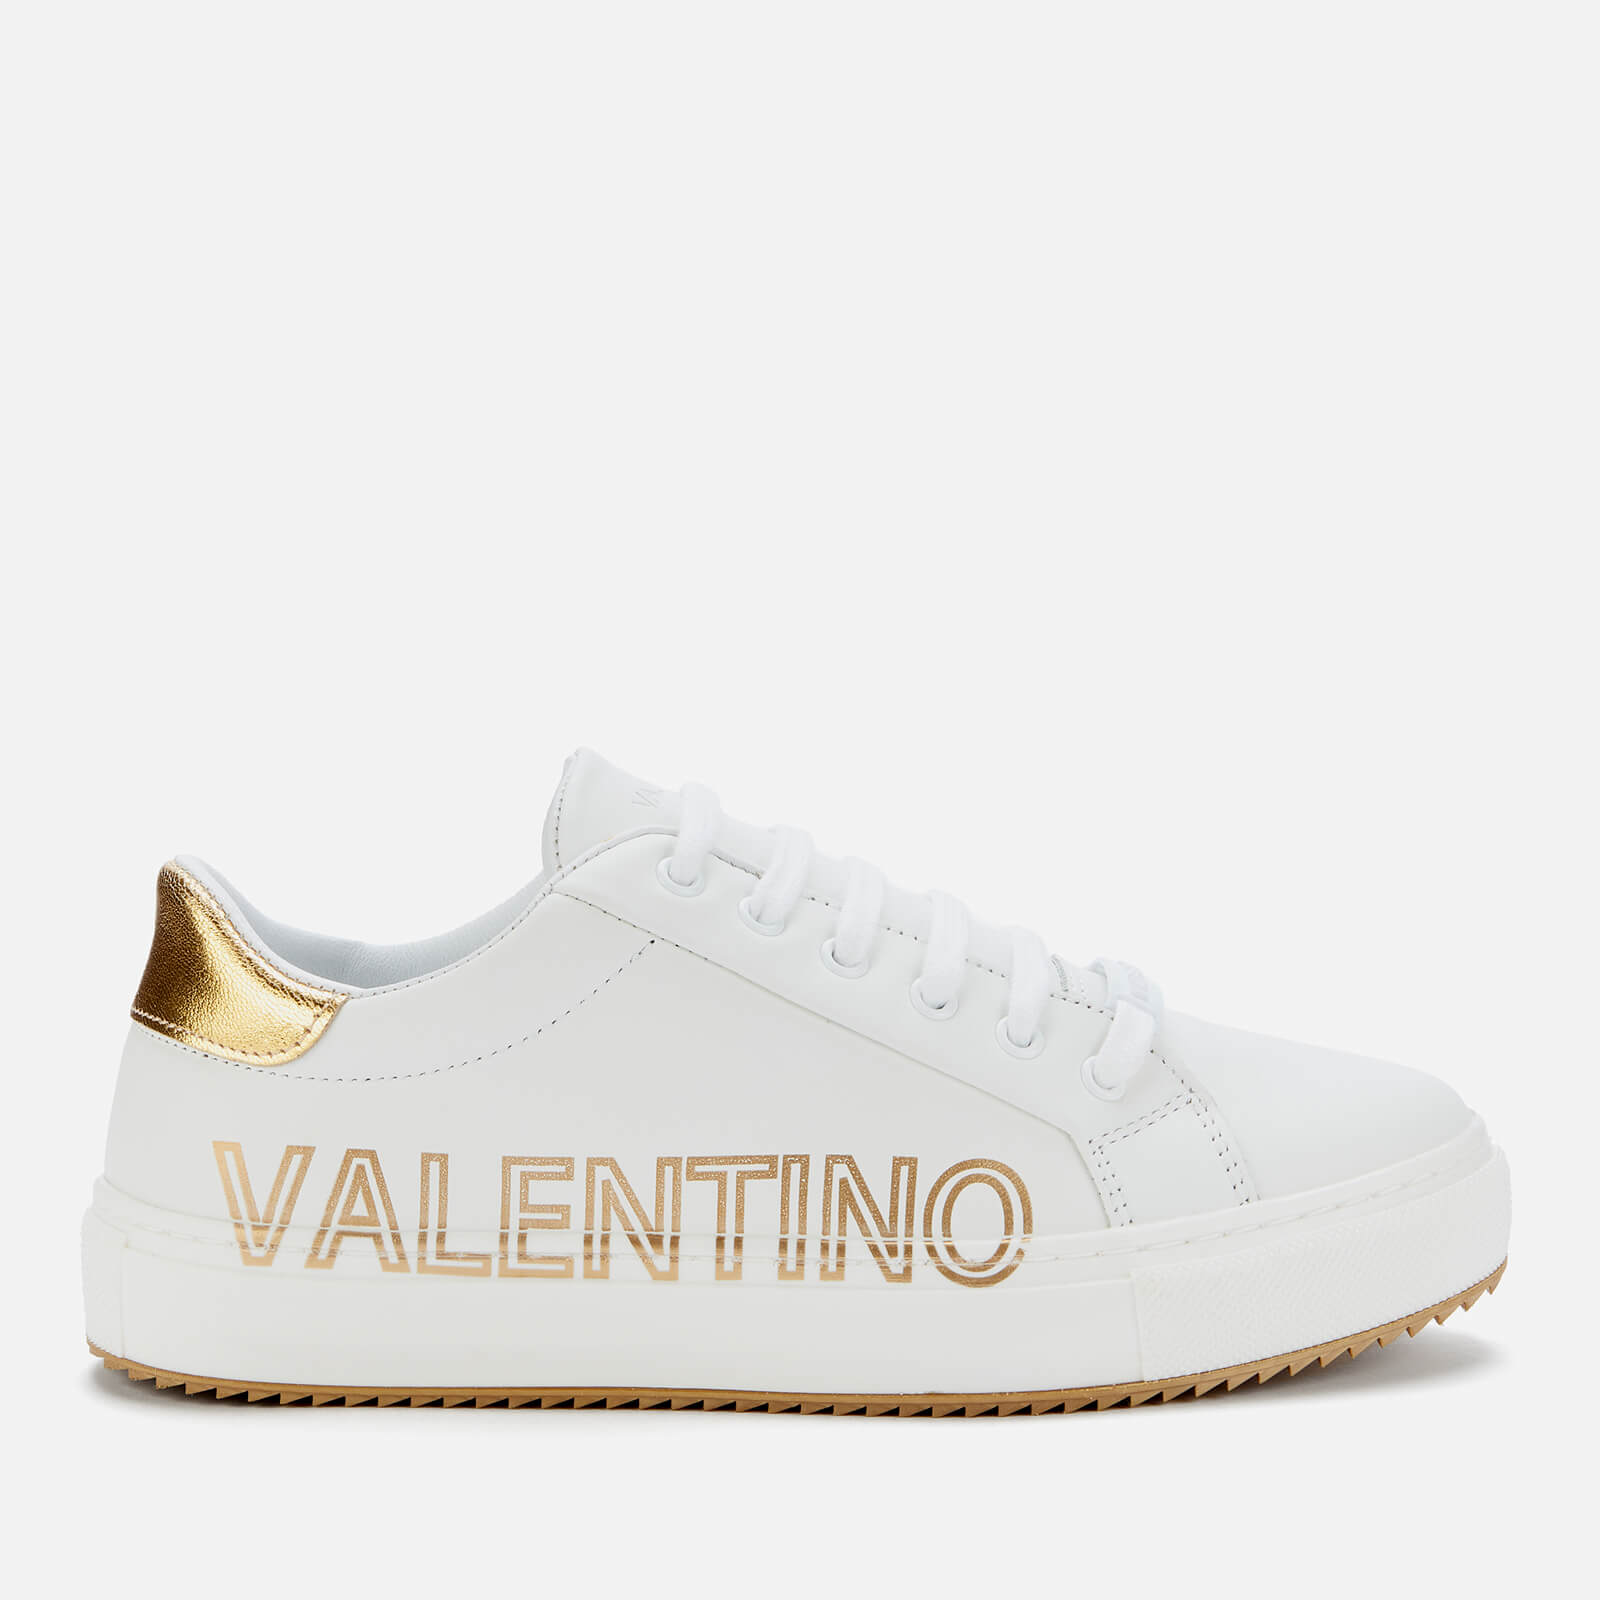 Valentino Shoes Women's Leather Low Top Trainers - White/Gold - UK 3